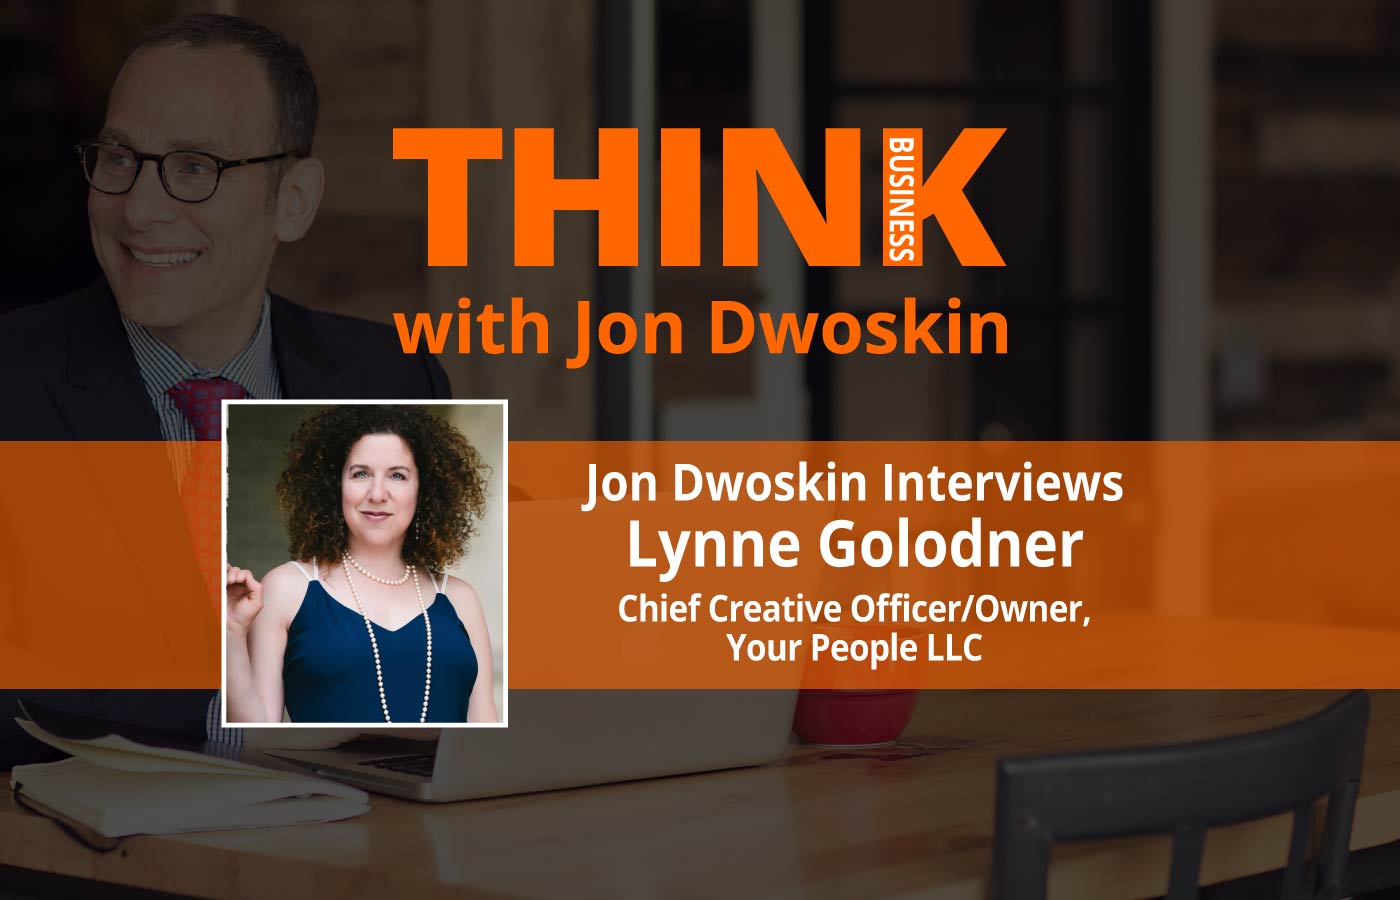 THINK Business: Jon Dwoskin Interviews Lynne Golodner, Chief Creative Officer/Owner of Your People LLC